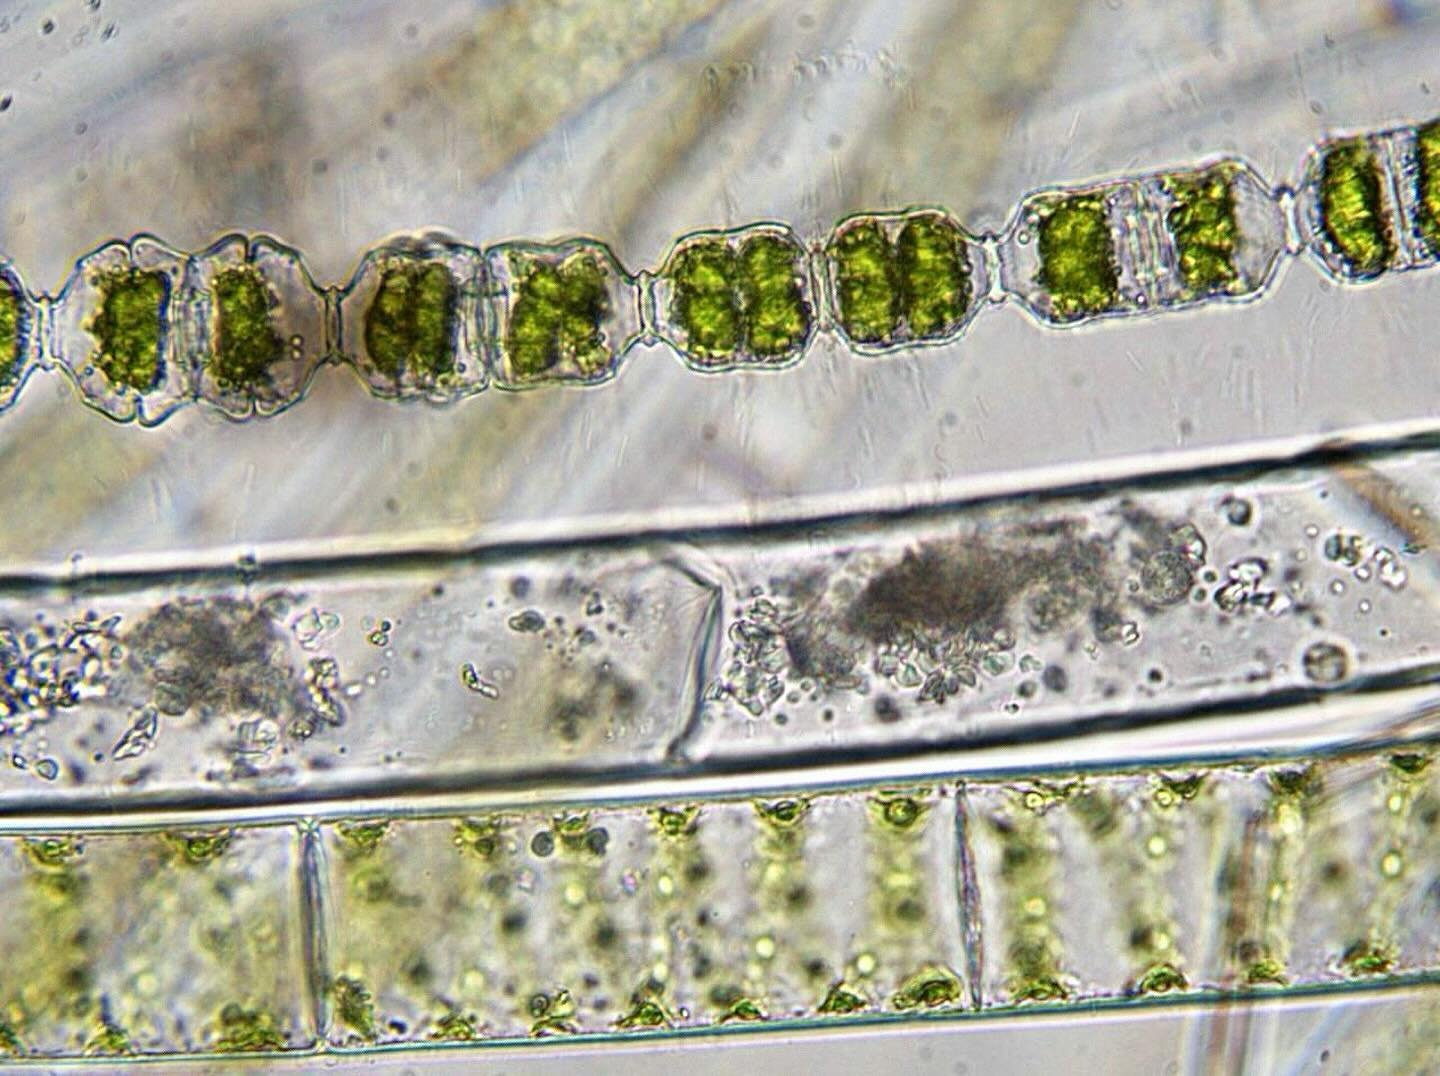 Filamentous green algae. 100x magnification. Brightfield.
.
I&rsquo;ll do another post in the future on complex multicellularity but here we have some good examples of algae with simple multicellularity. These cells exist as long filaments of many si